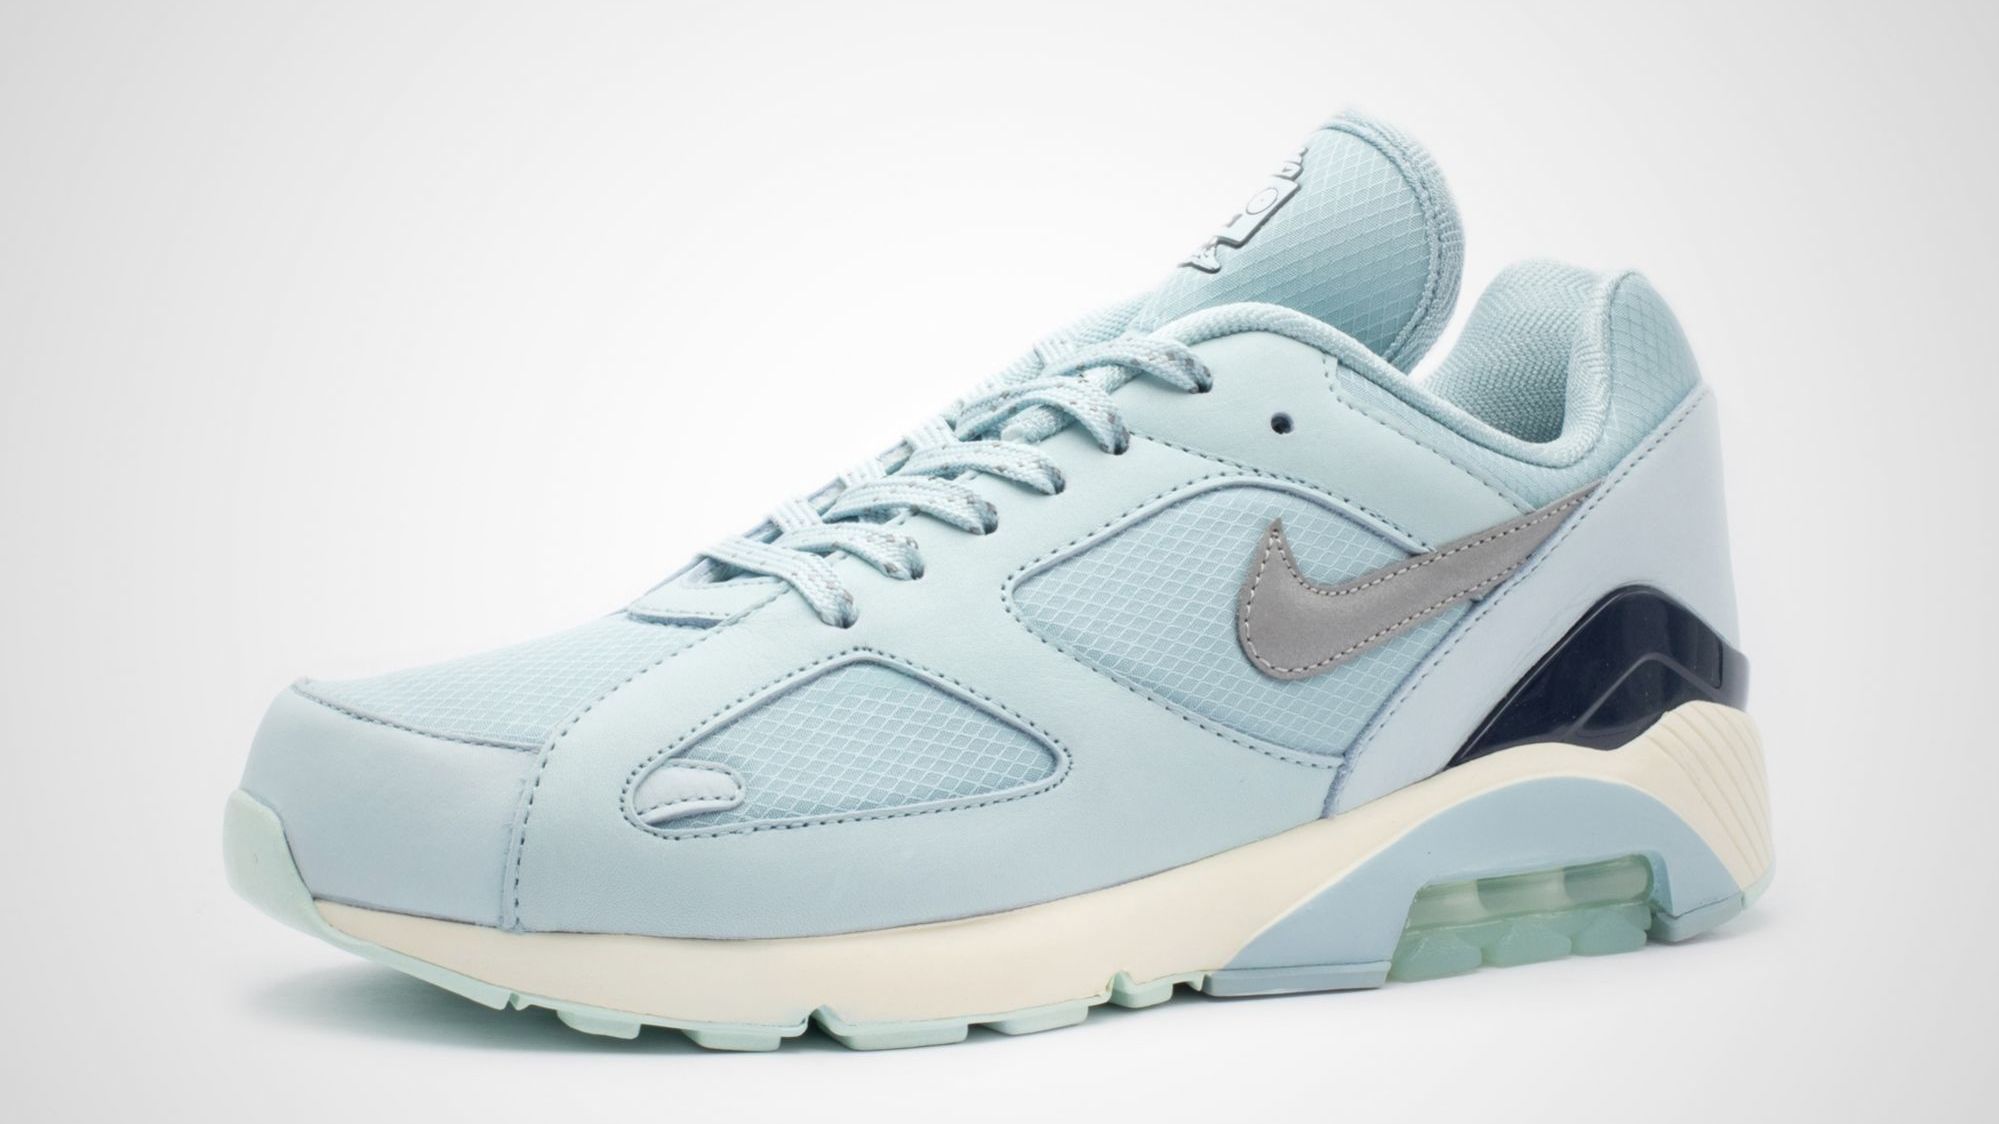 Nike Air Max 180 'Ice' AV3734-400 Release Date | Sole Collector